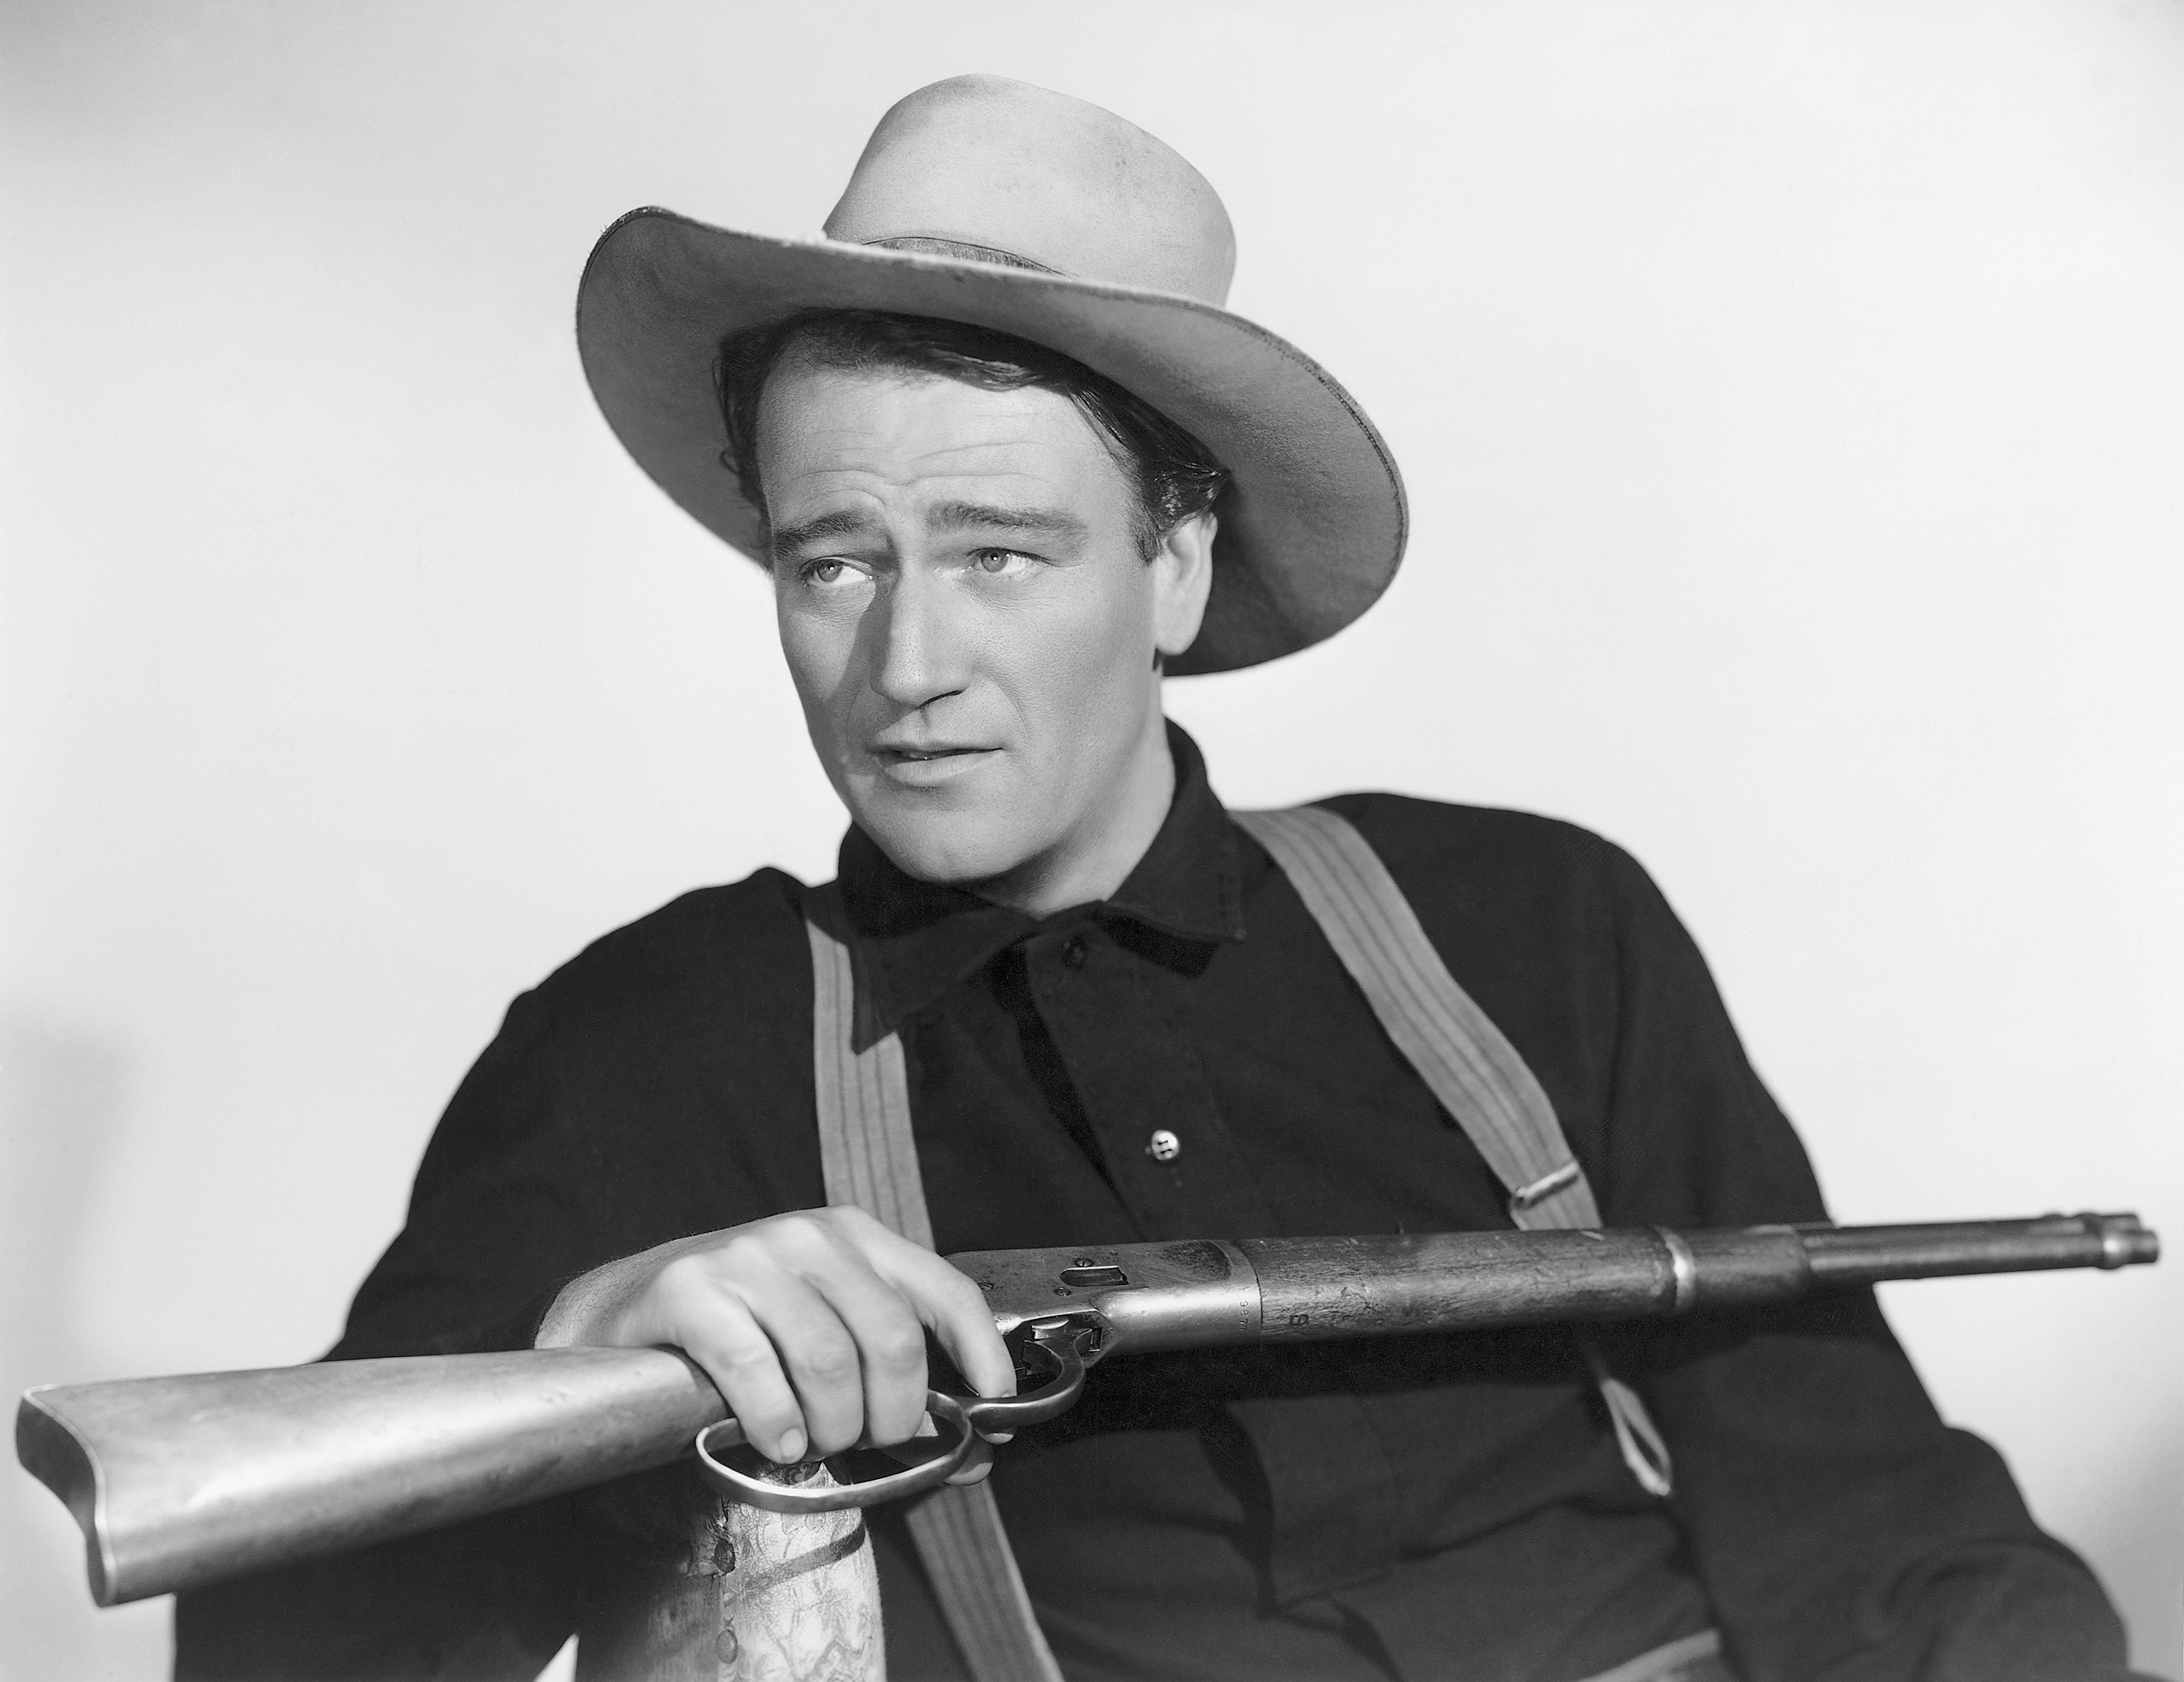 Fact Check: The Claim a Child's Letter Helped John Wayne Convert to Christianity Requires Some Context